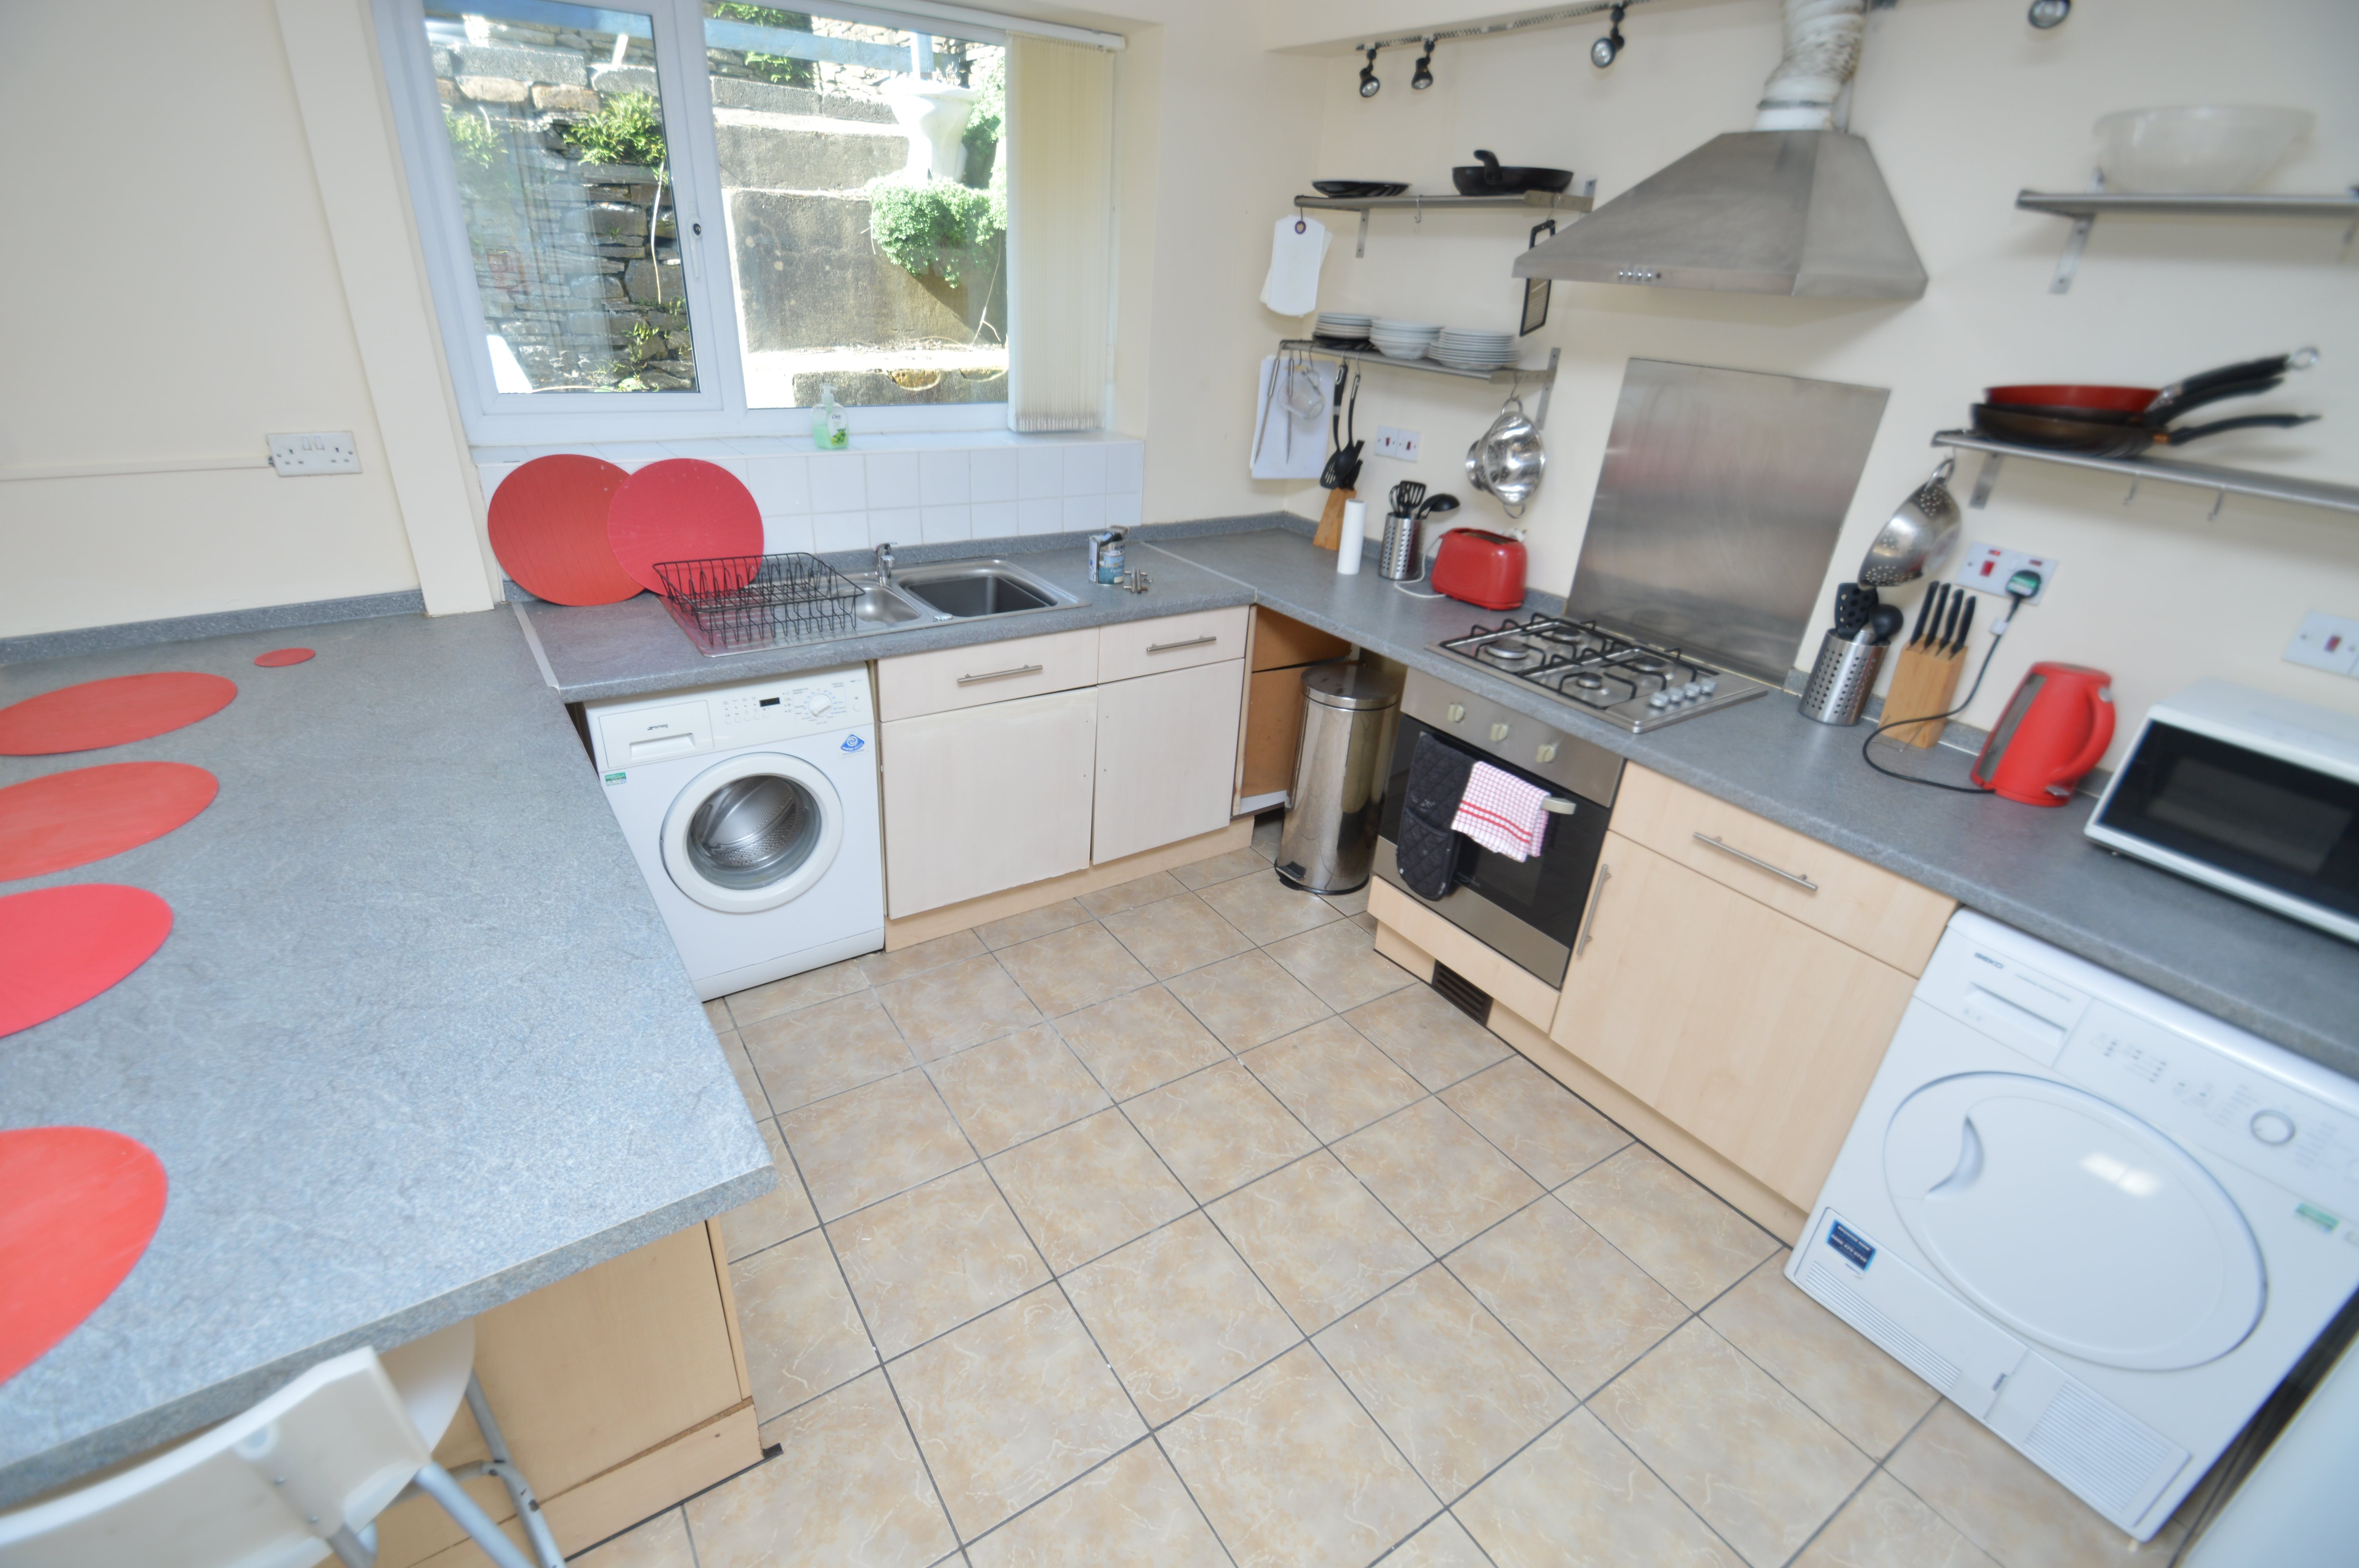 1 bed house / flat share to rent in Wood Road , Treforest  4